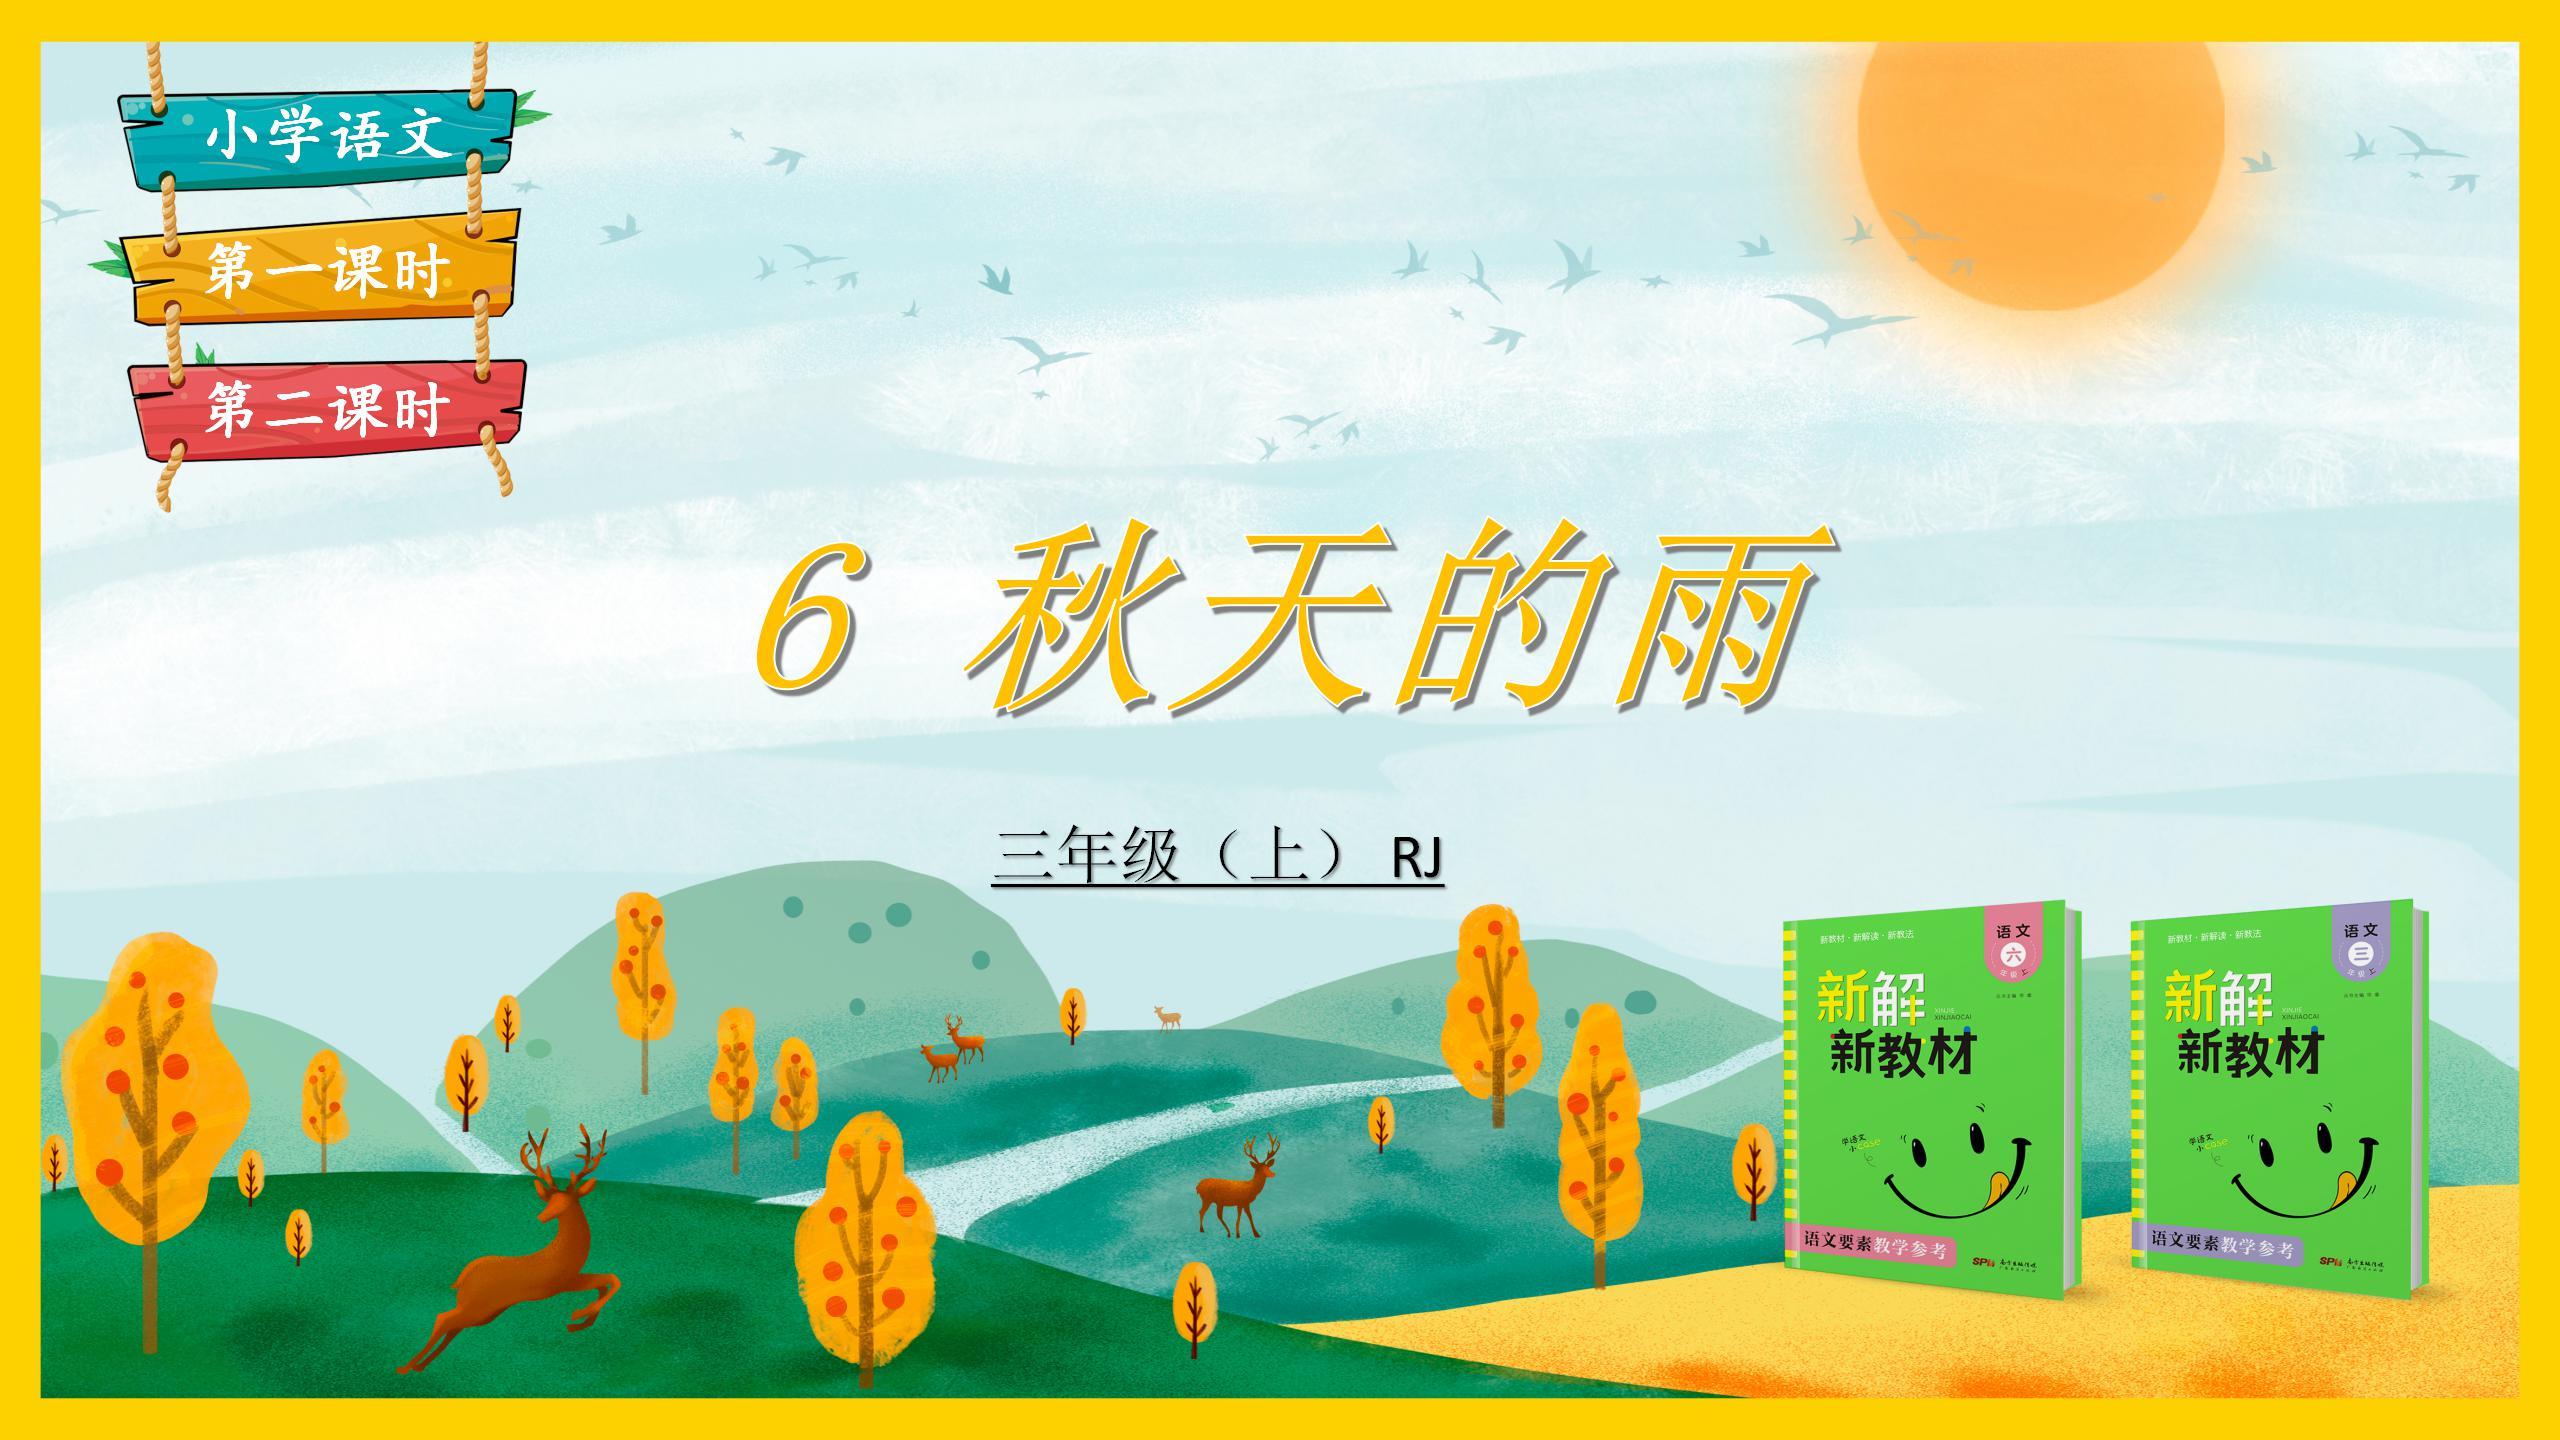 The Ministry of Chinese third grade Lesson 6 "Autumn Rain" PPT courseware